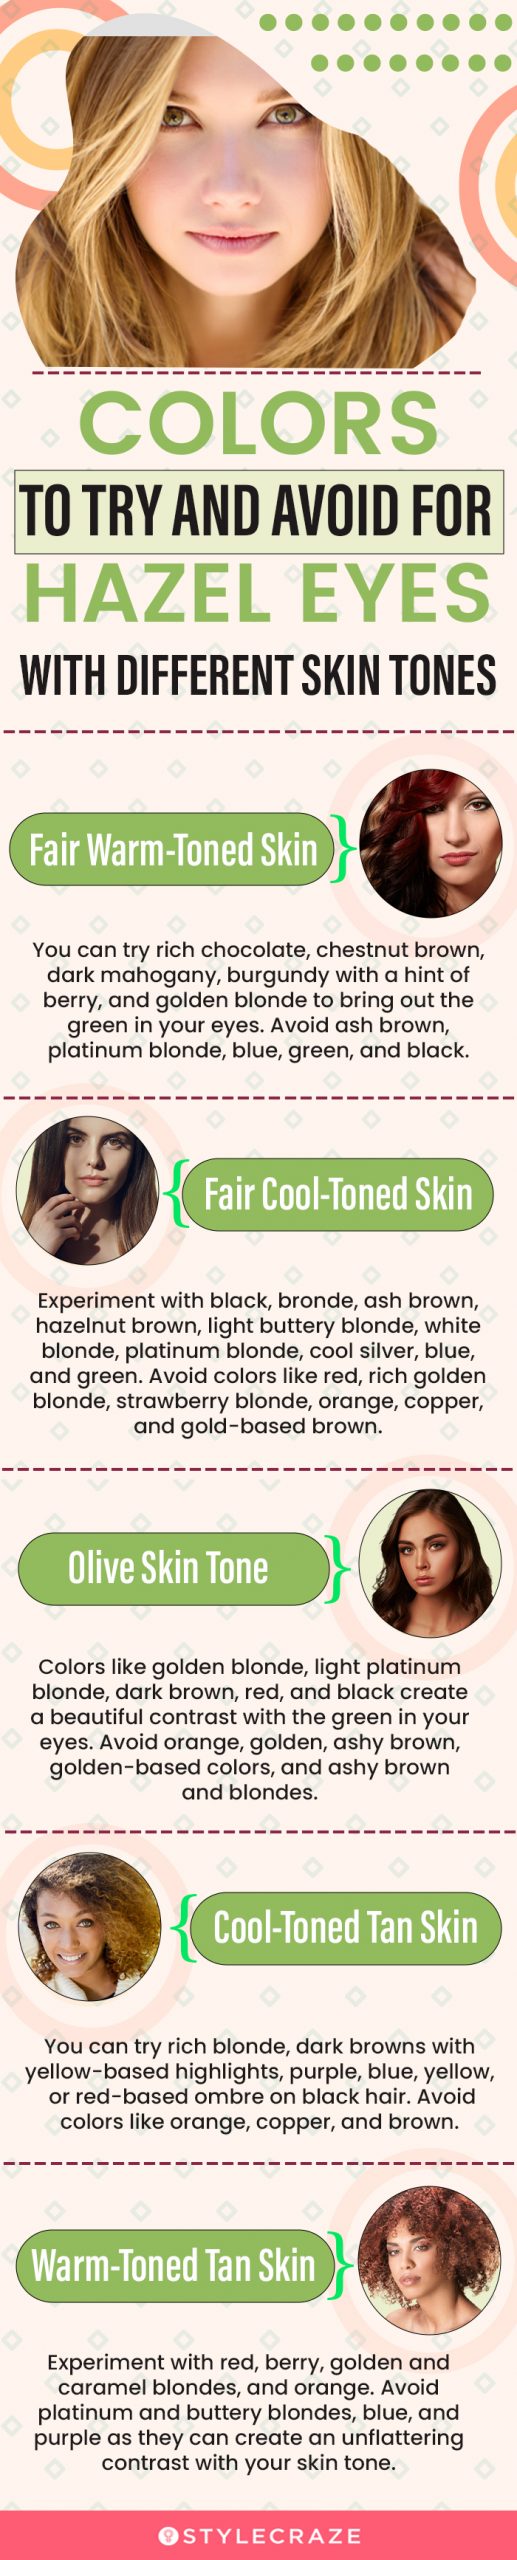 colors to try and avoid for hazel eyes with different skin tones (infographic)